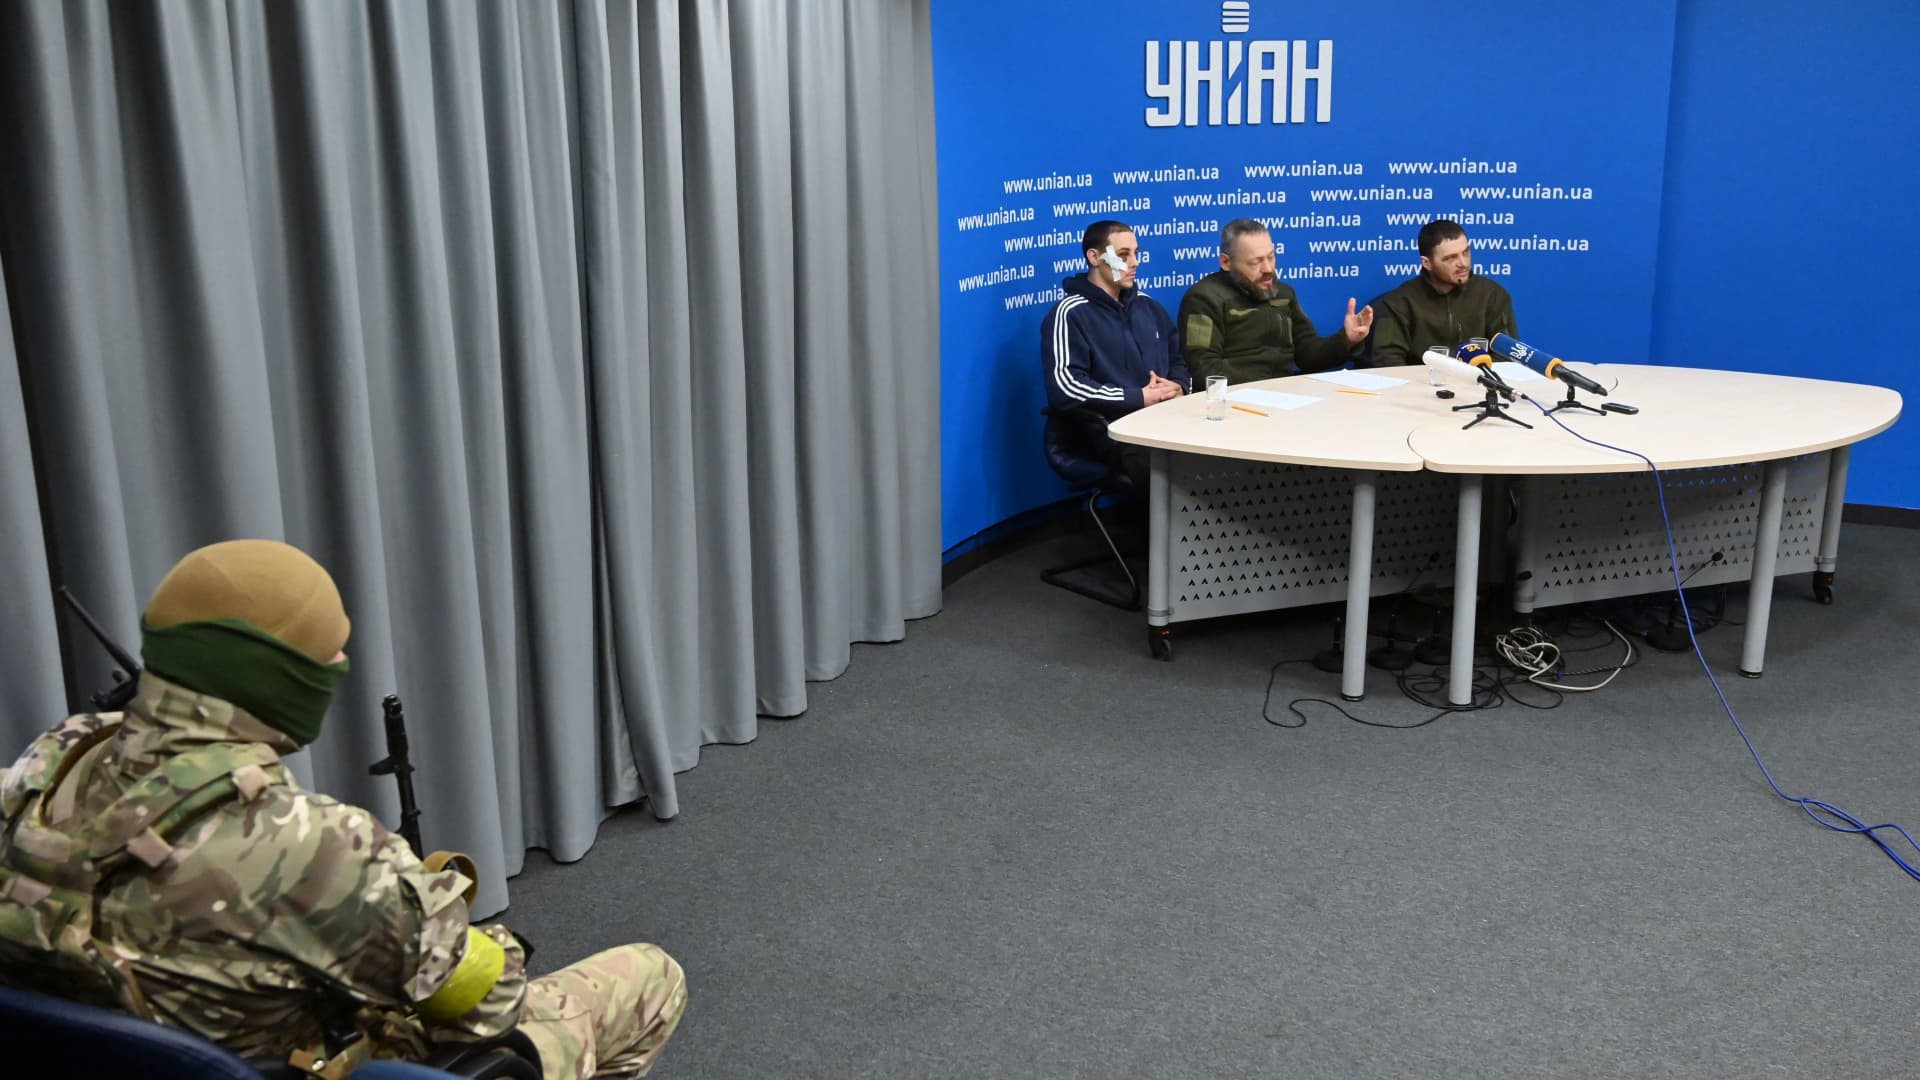 Russian prisoners of war, officers of the police sergeant Yevgeniy Plotnikov, lieutenant colonel Dmitriy Astakhov, and captain Yevgeniy Spiridonov are presented to the press in Ukrainian capital of Kyiv on March 2, 2022. 